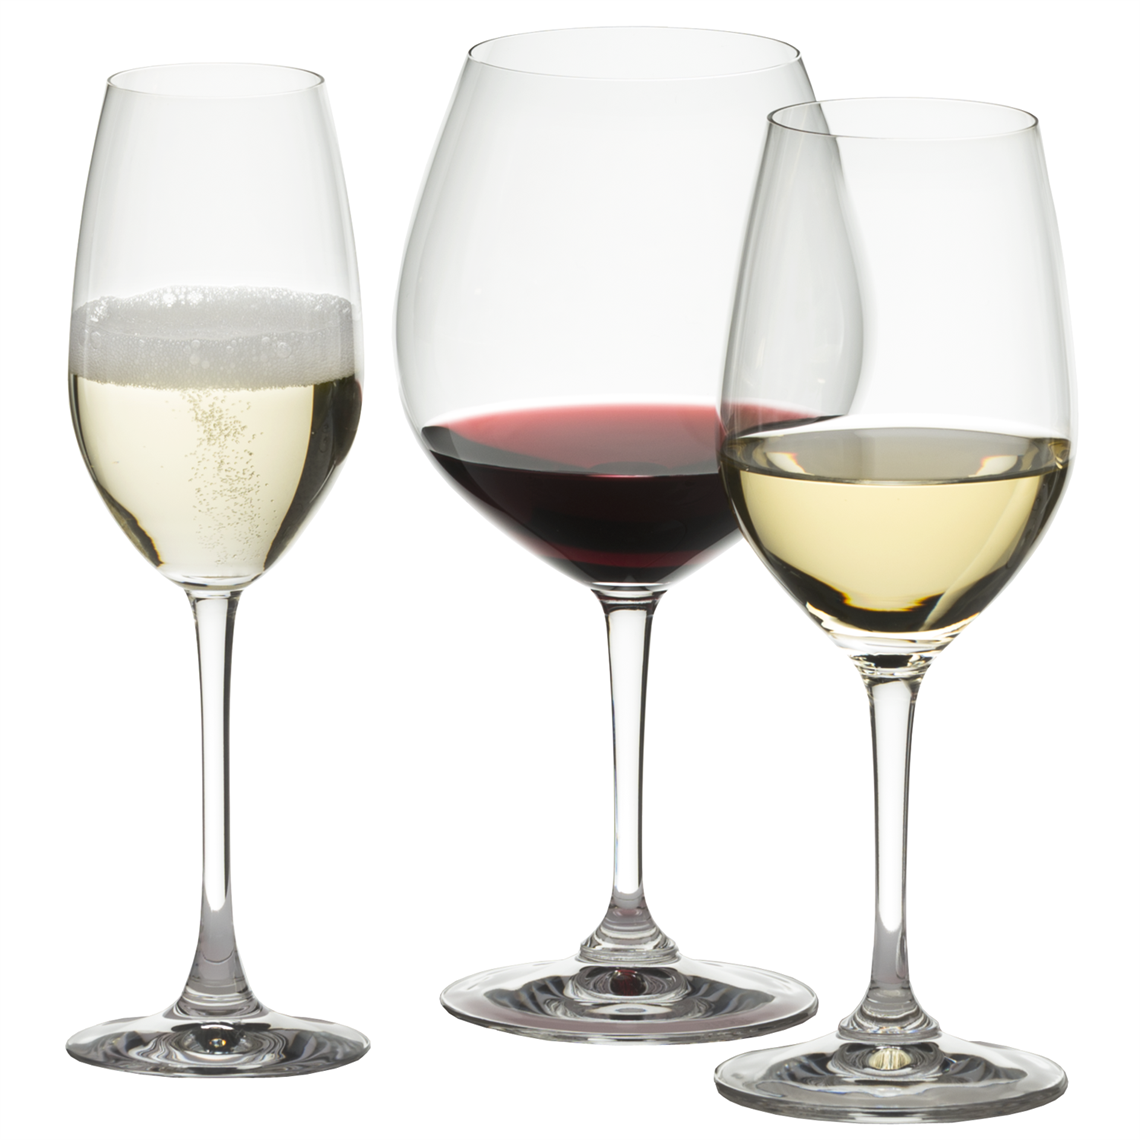 View more riedel sale from our Restaurant & Trade Glasses range